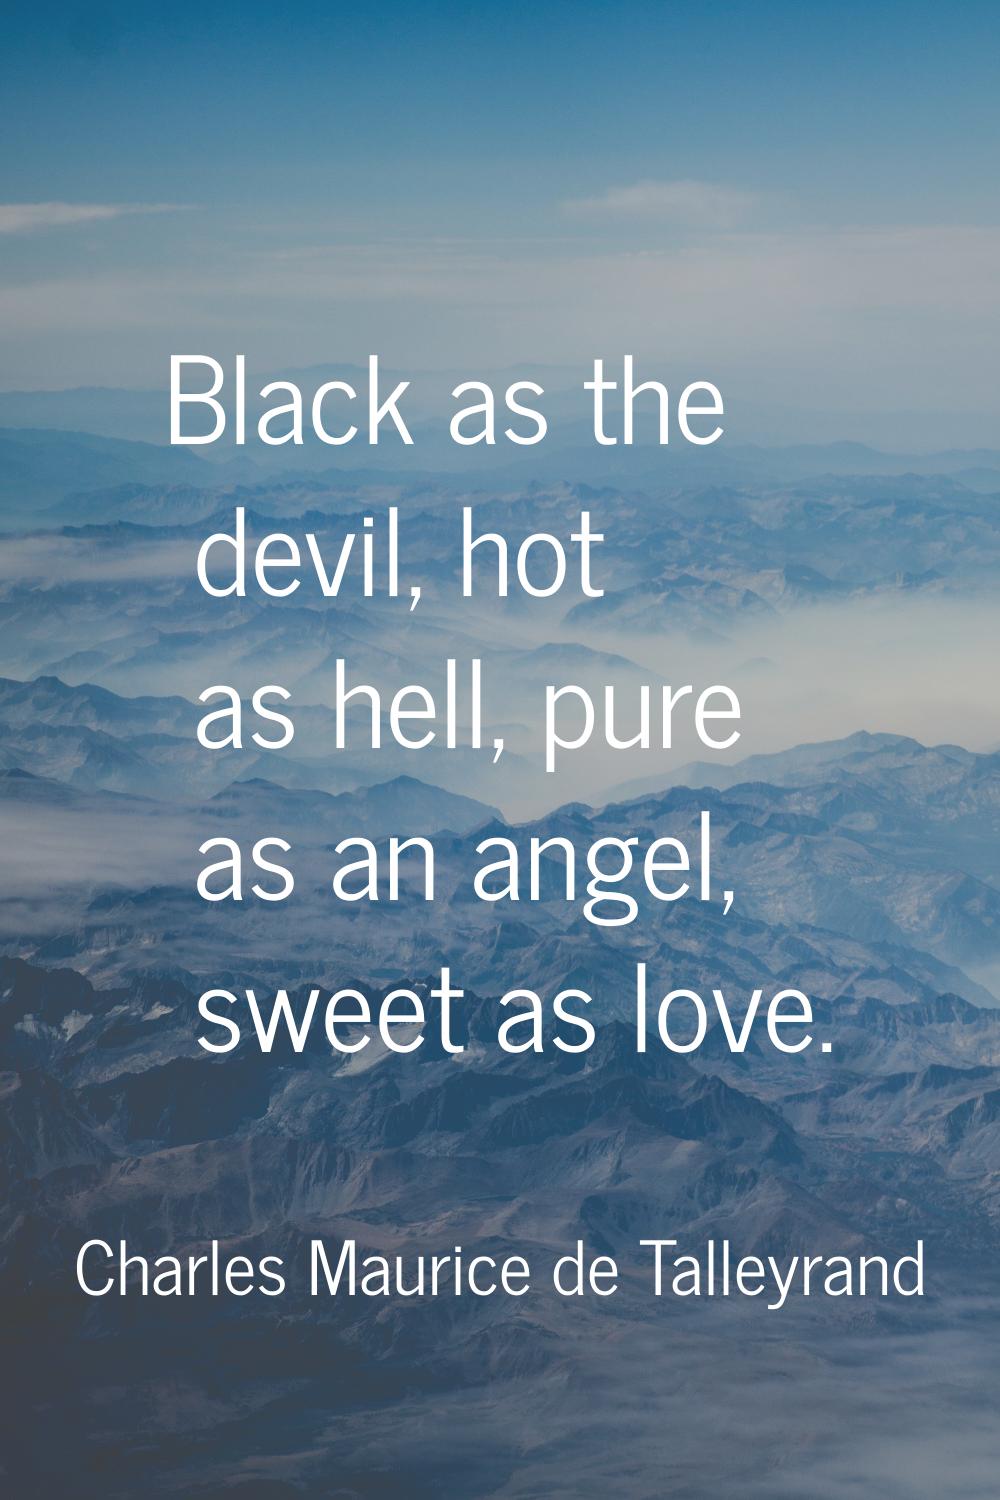 Black as the devil, hot as hell, pure as an angel, sweet as love.